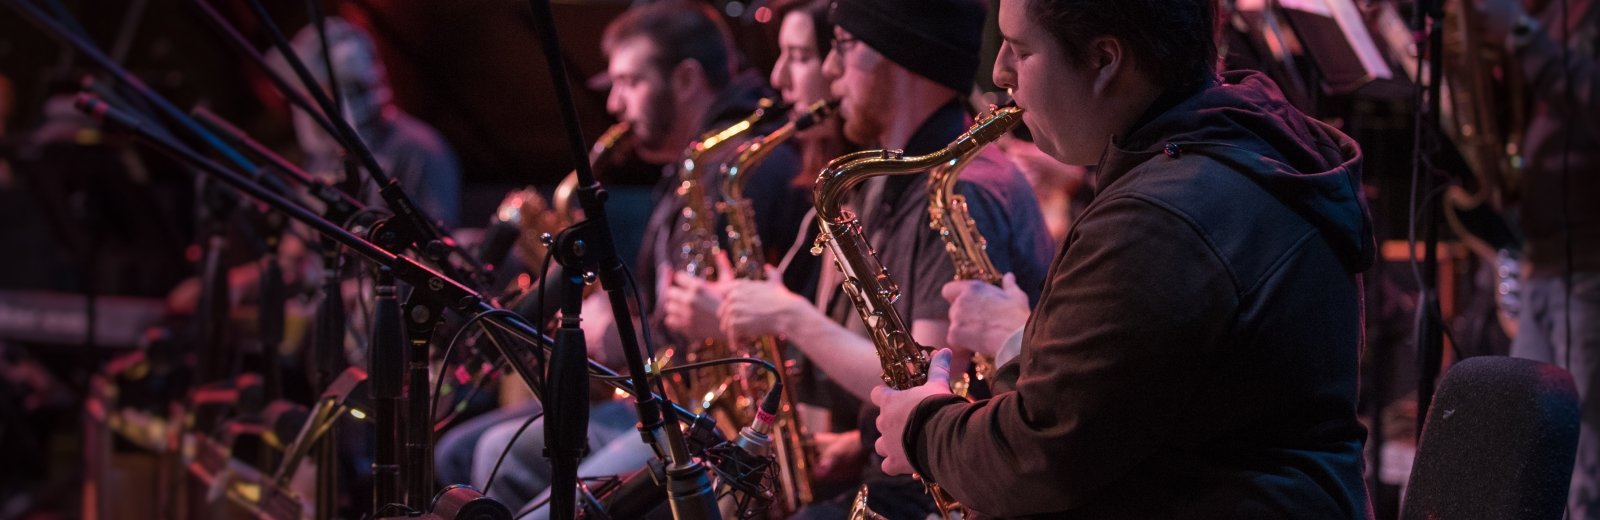 Students playing saxophones during a dress rehearsal of the Keweenaw Symphony Orchestra on the stage of the Rozsa Center for the Performing Arts.